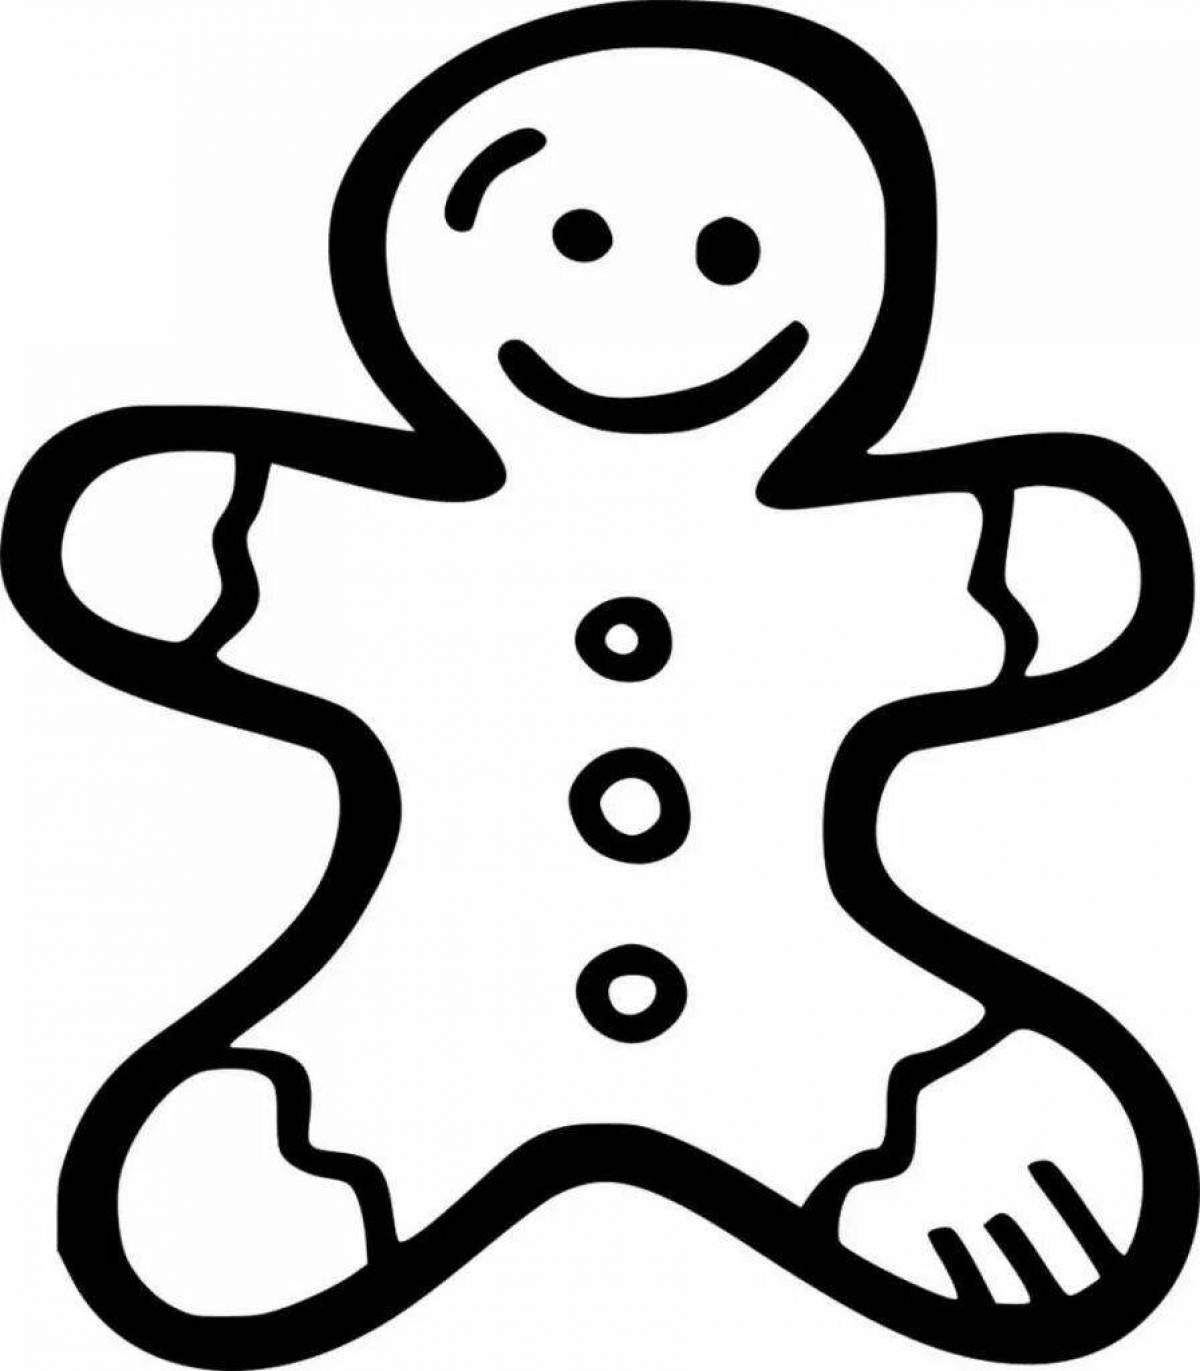 Coloring page quirky gingerbread man